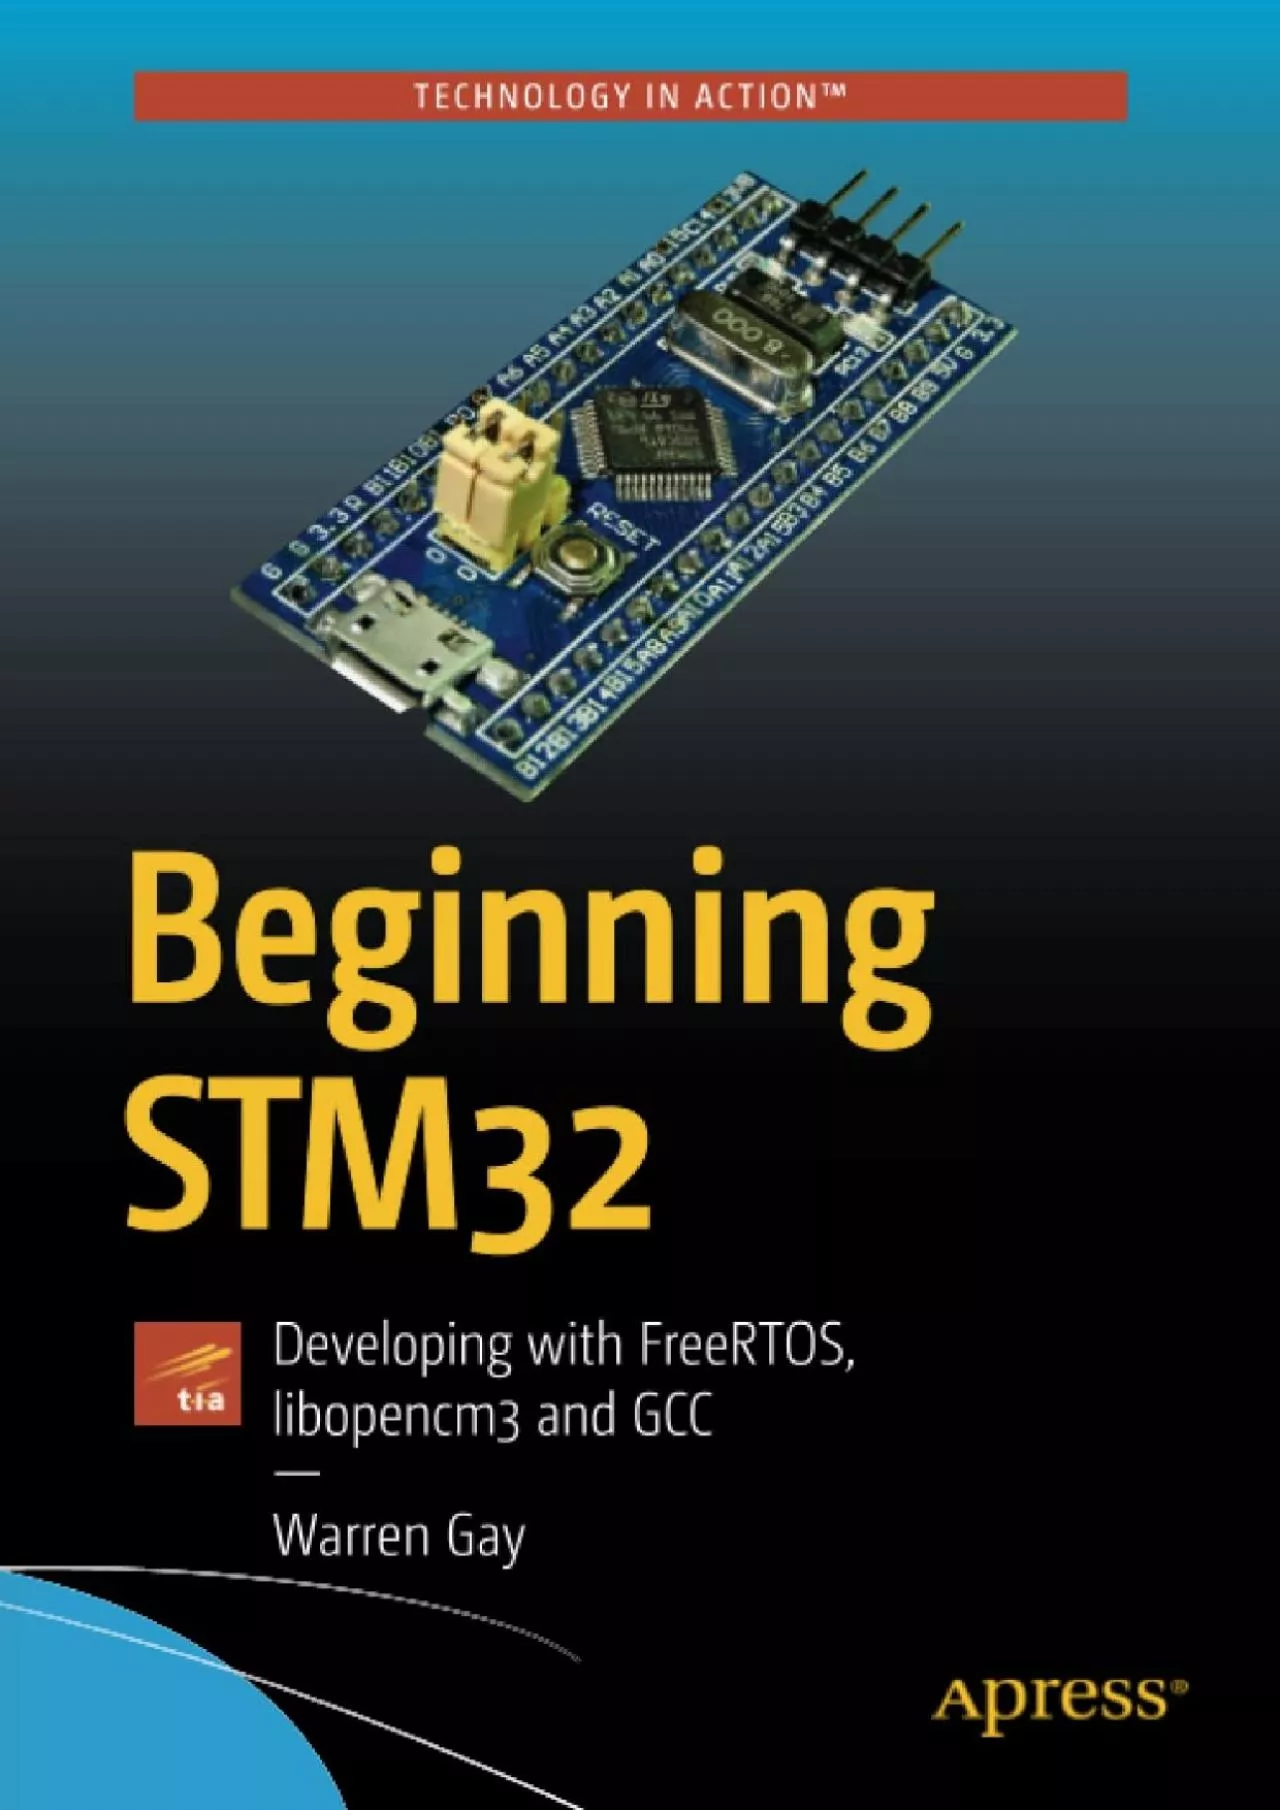 (DOWNLOAD)-Beginning STM32: Developing with FreeRTOS, libopencm3 and GCC